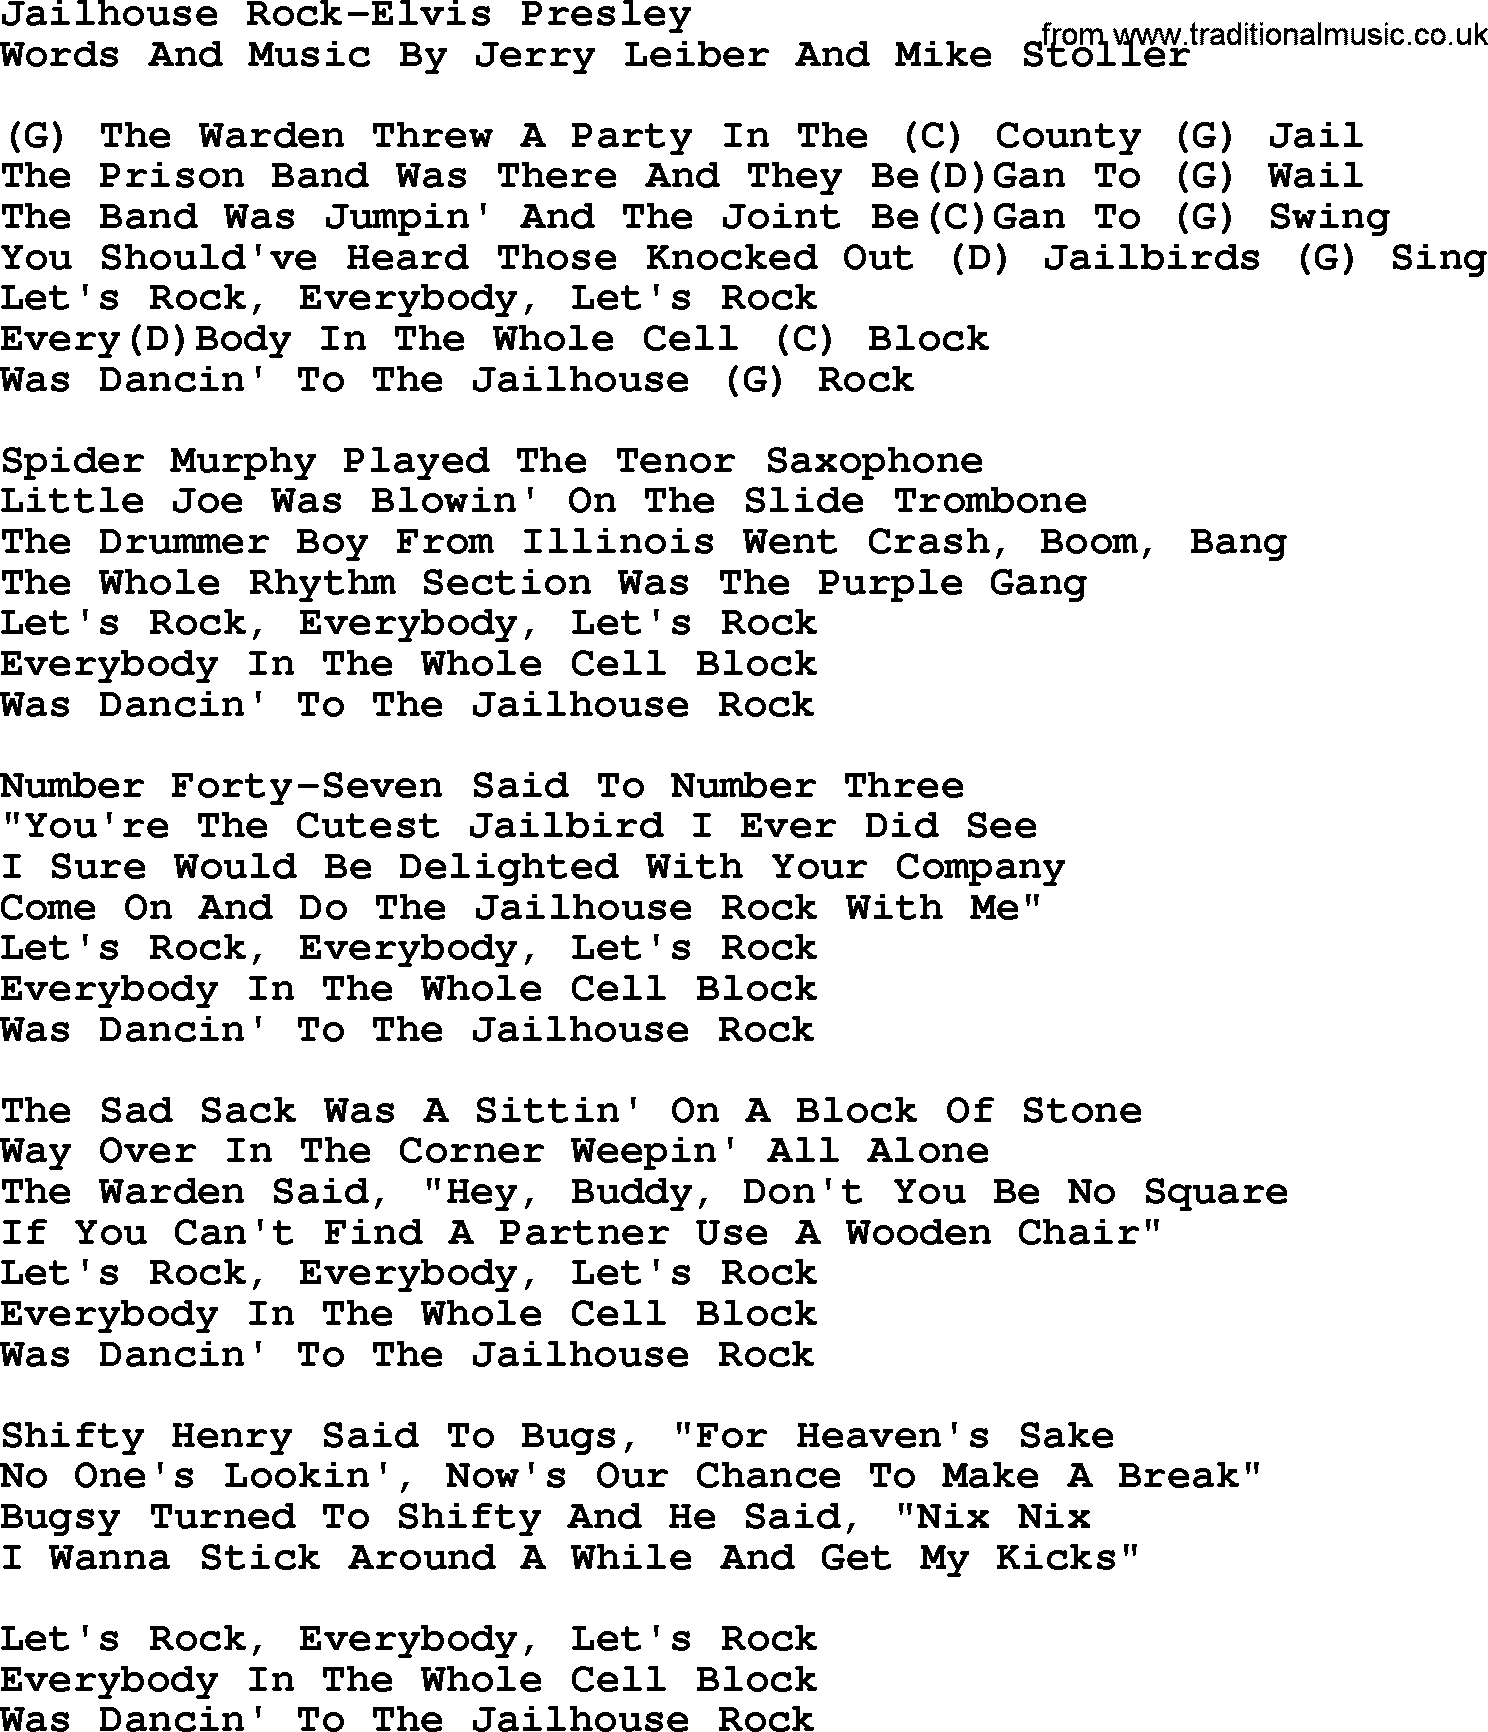 Country music song: Jailhouse Rock-Elvis Presley lyrics and chords